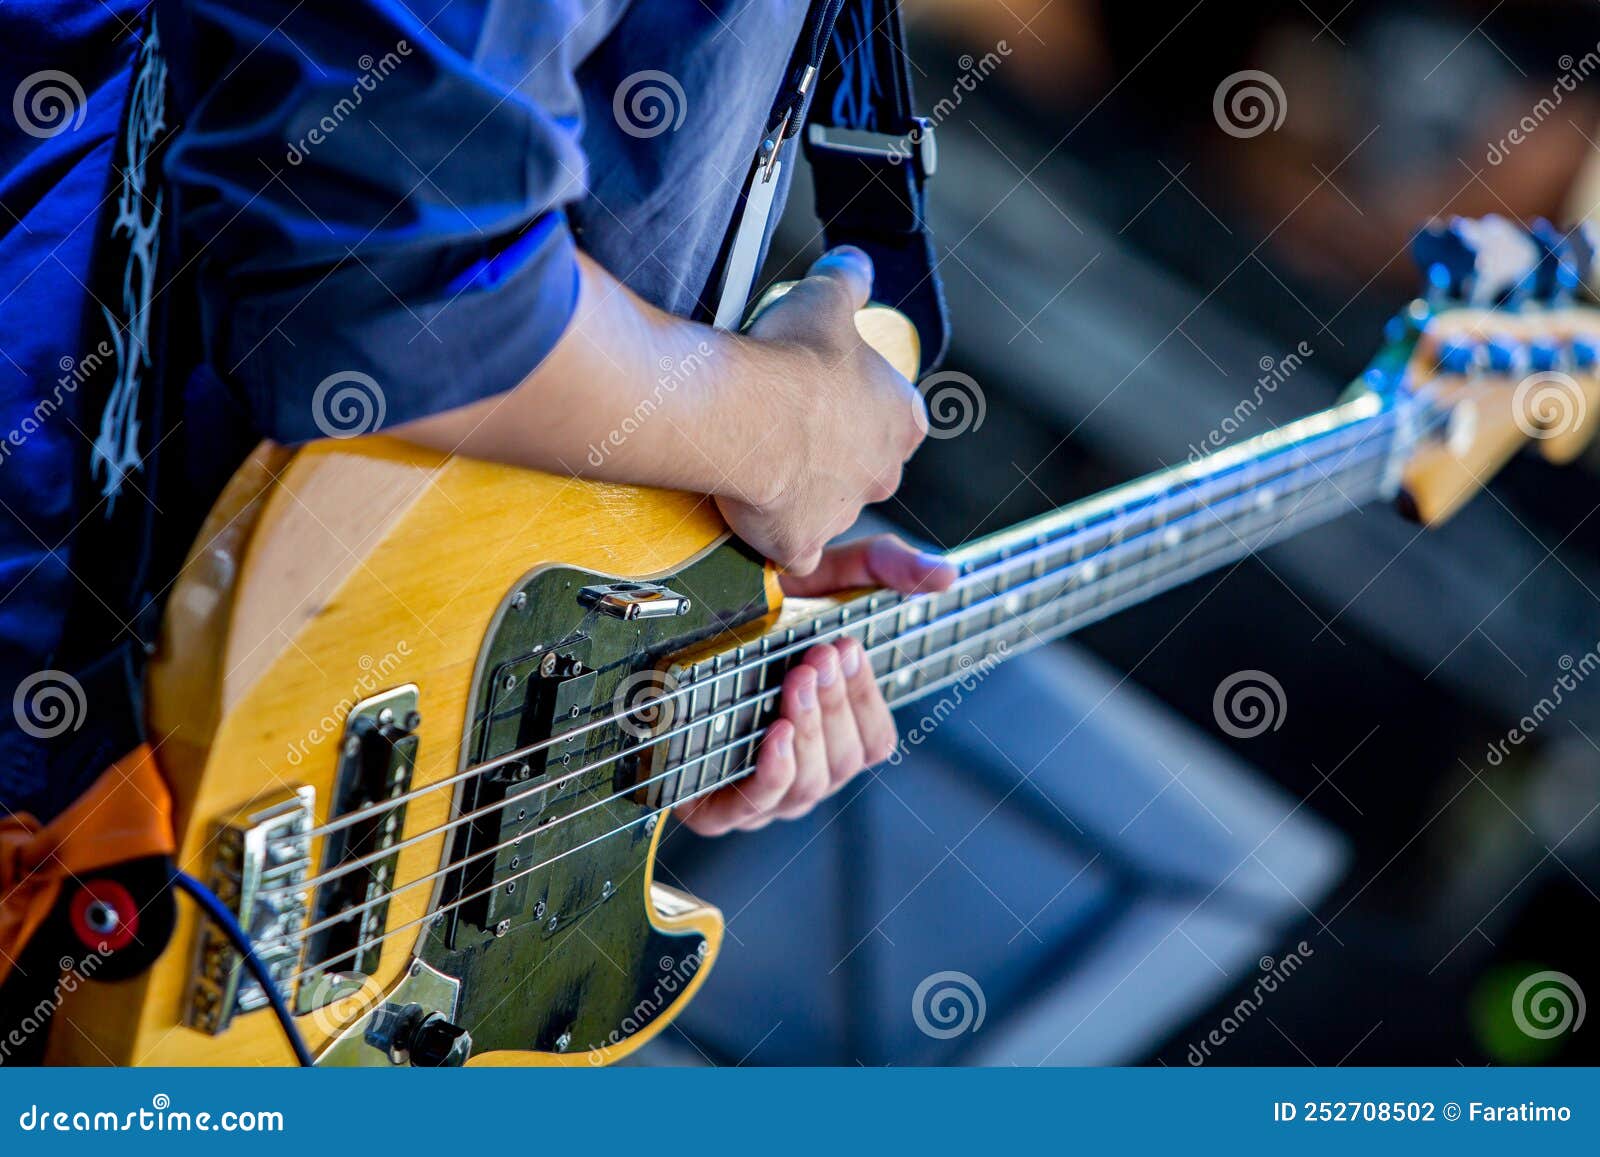 start playing at the electric bass quitar